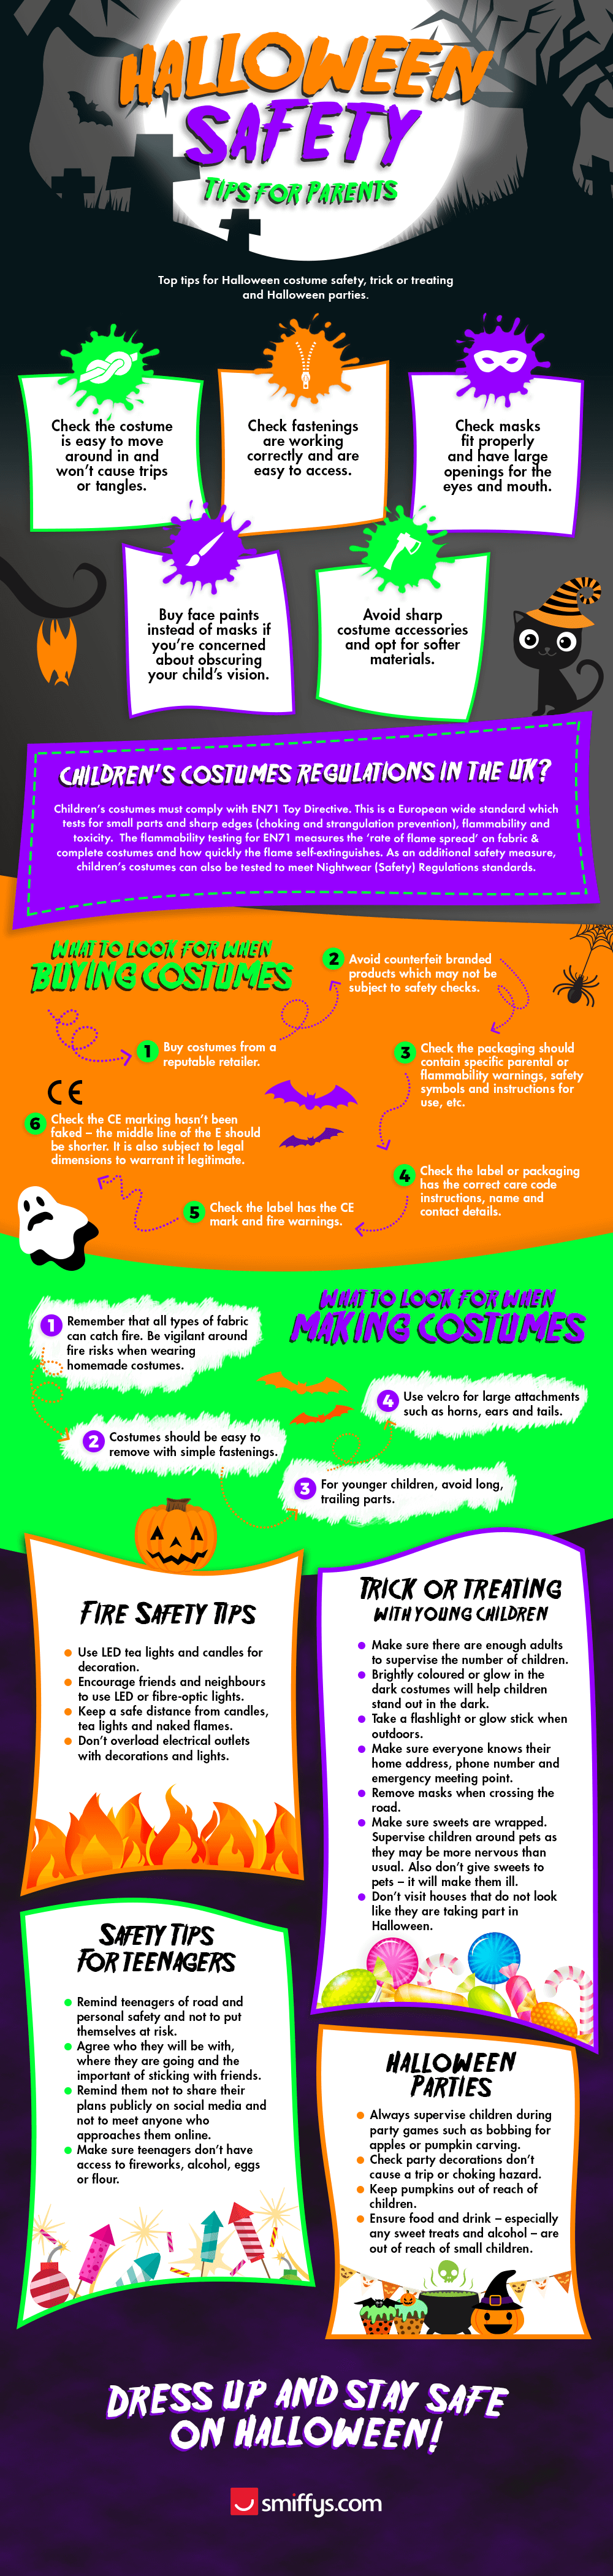 Halloween Safety Tips For Parents